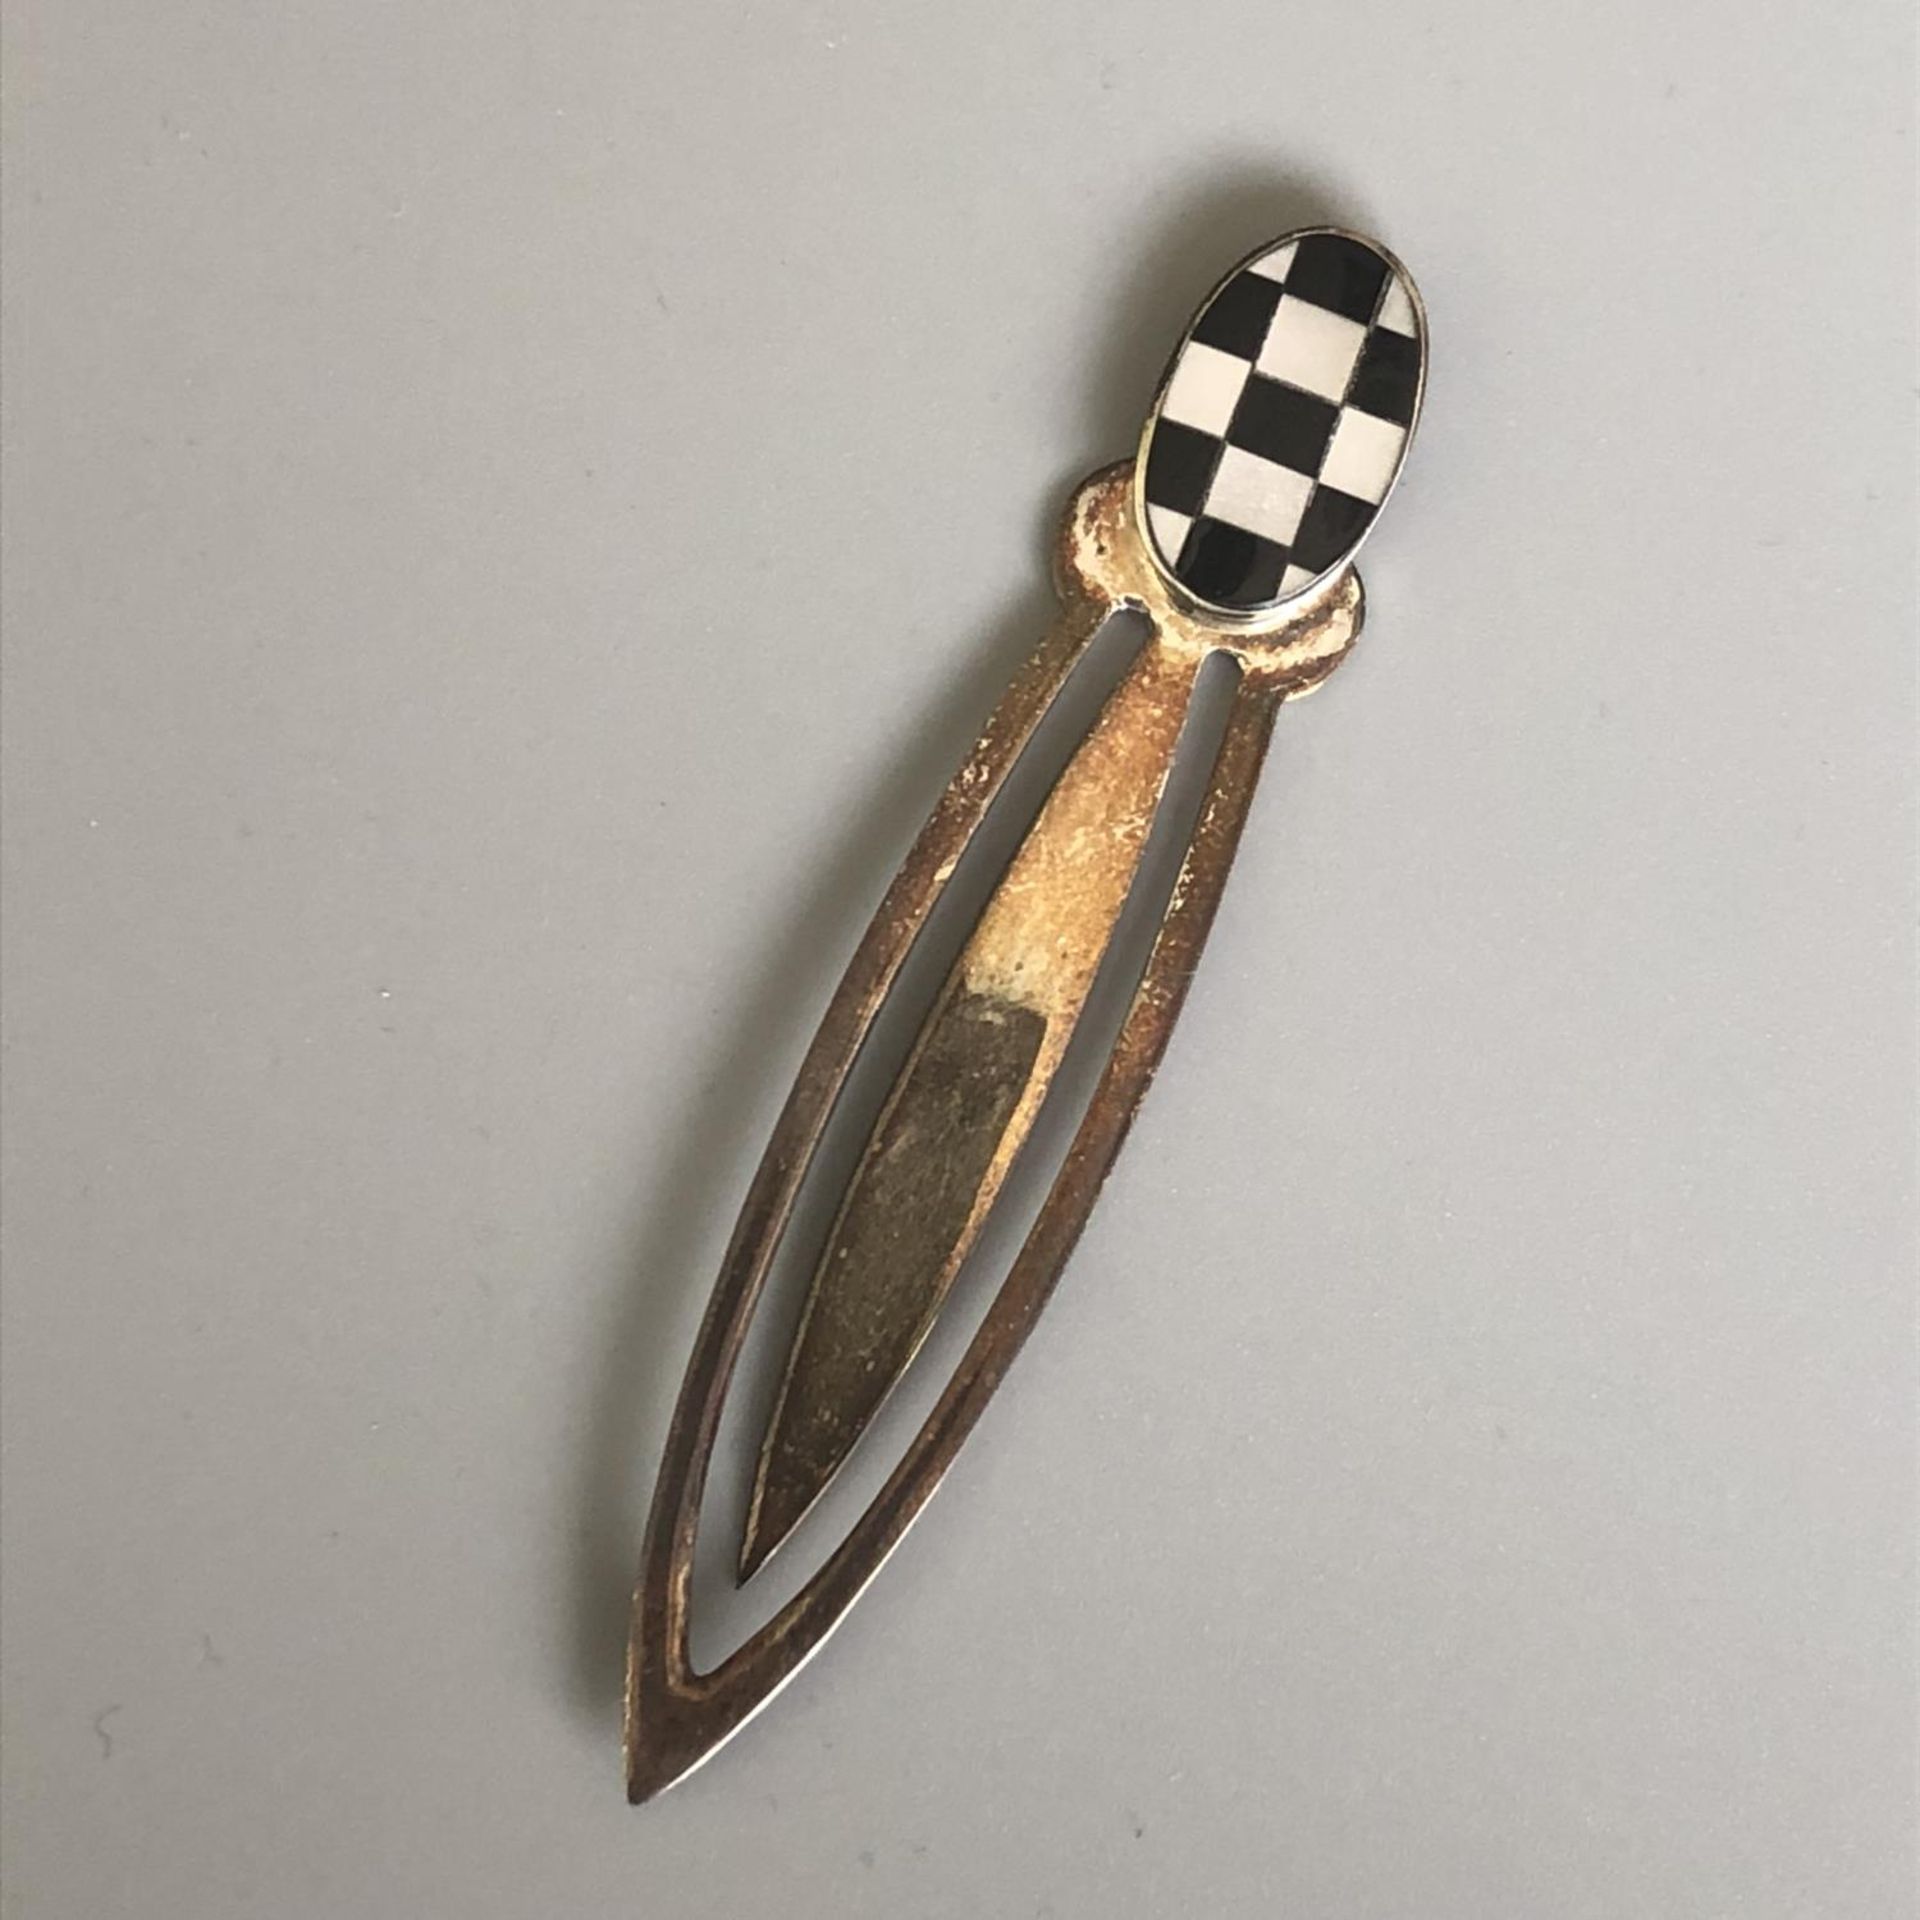 A hallmarked silver book mark or money clip with checkered black and white finial